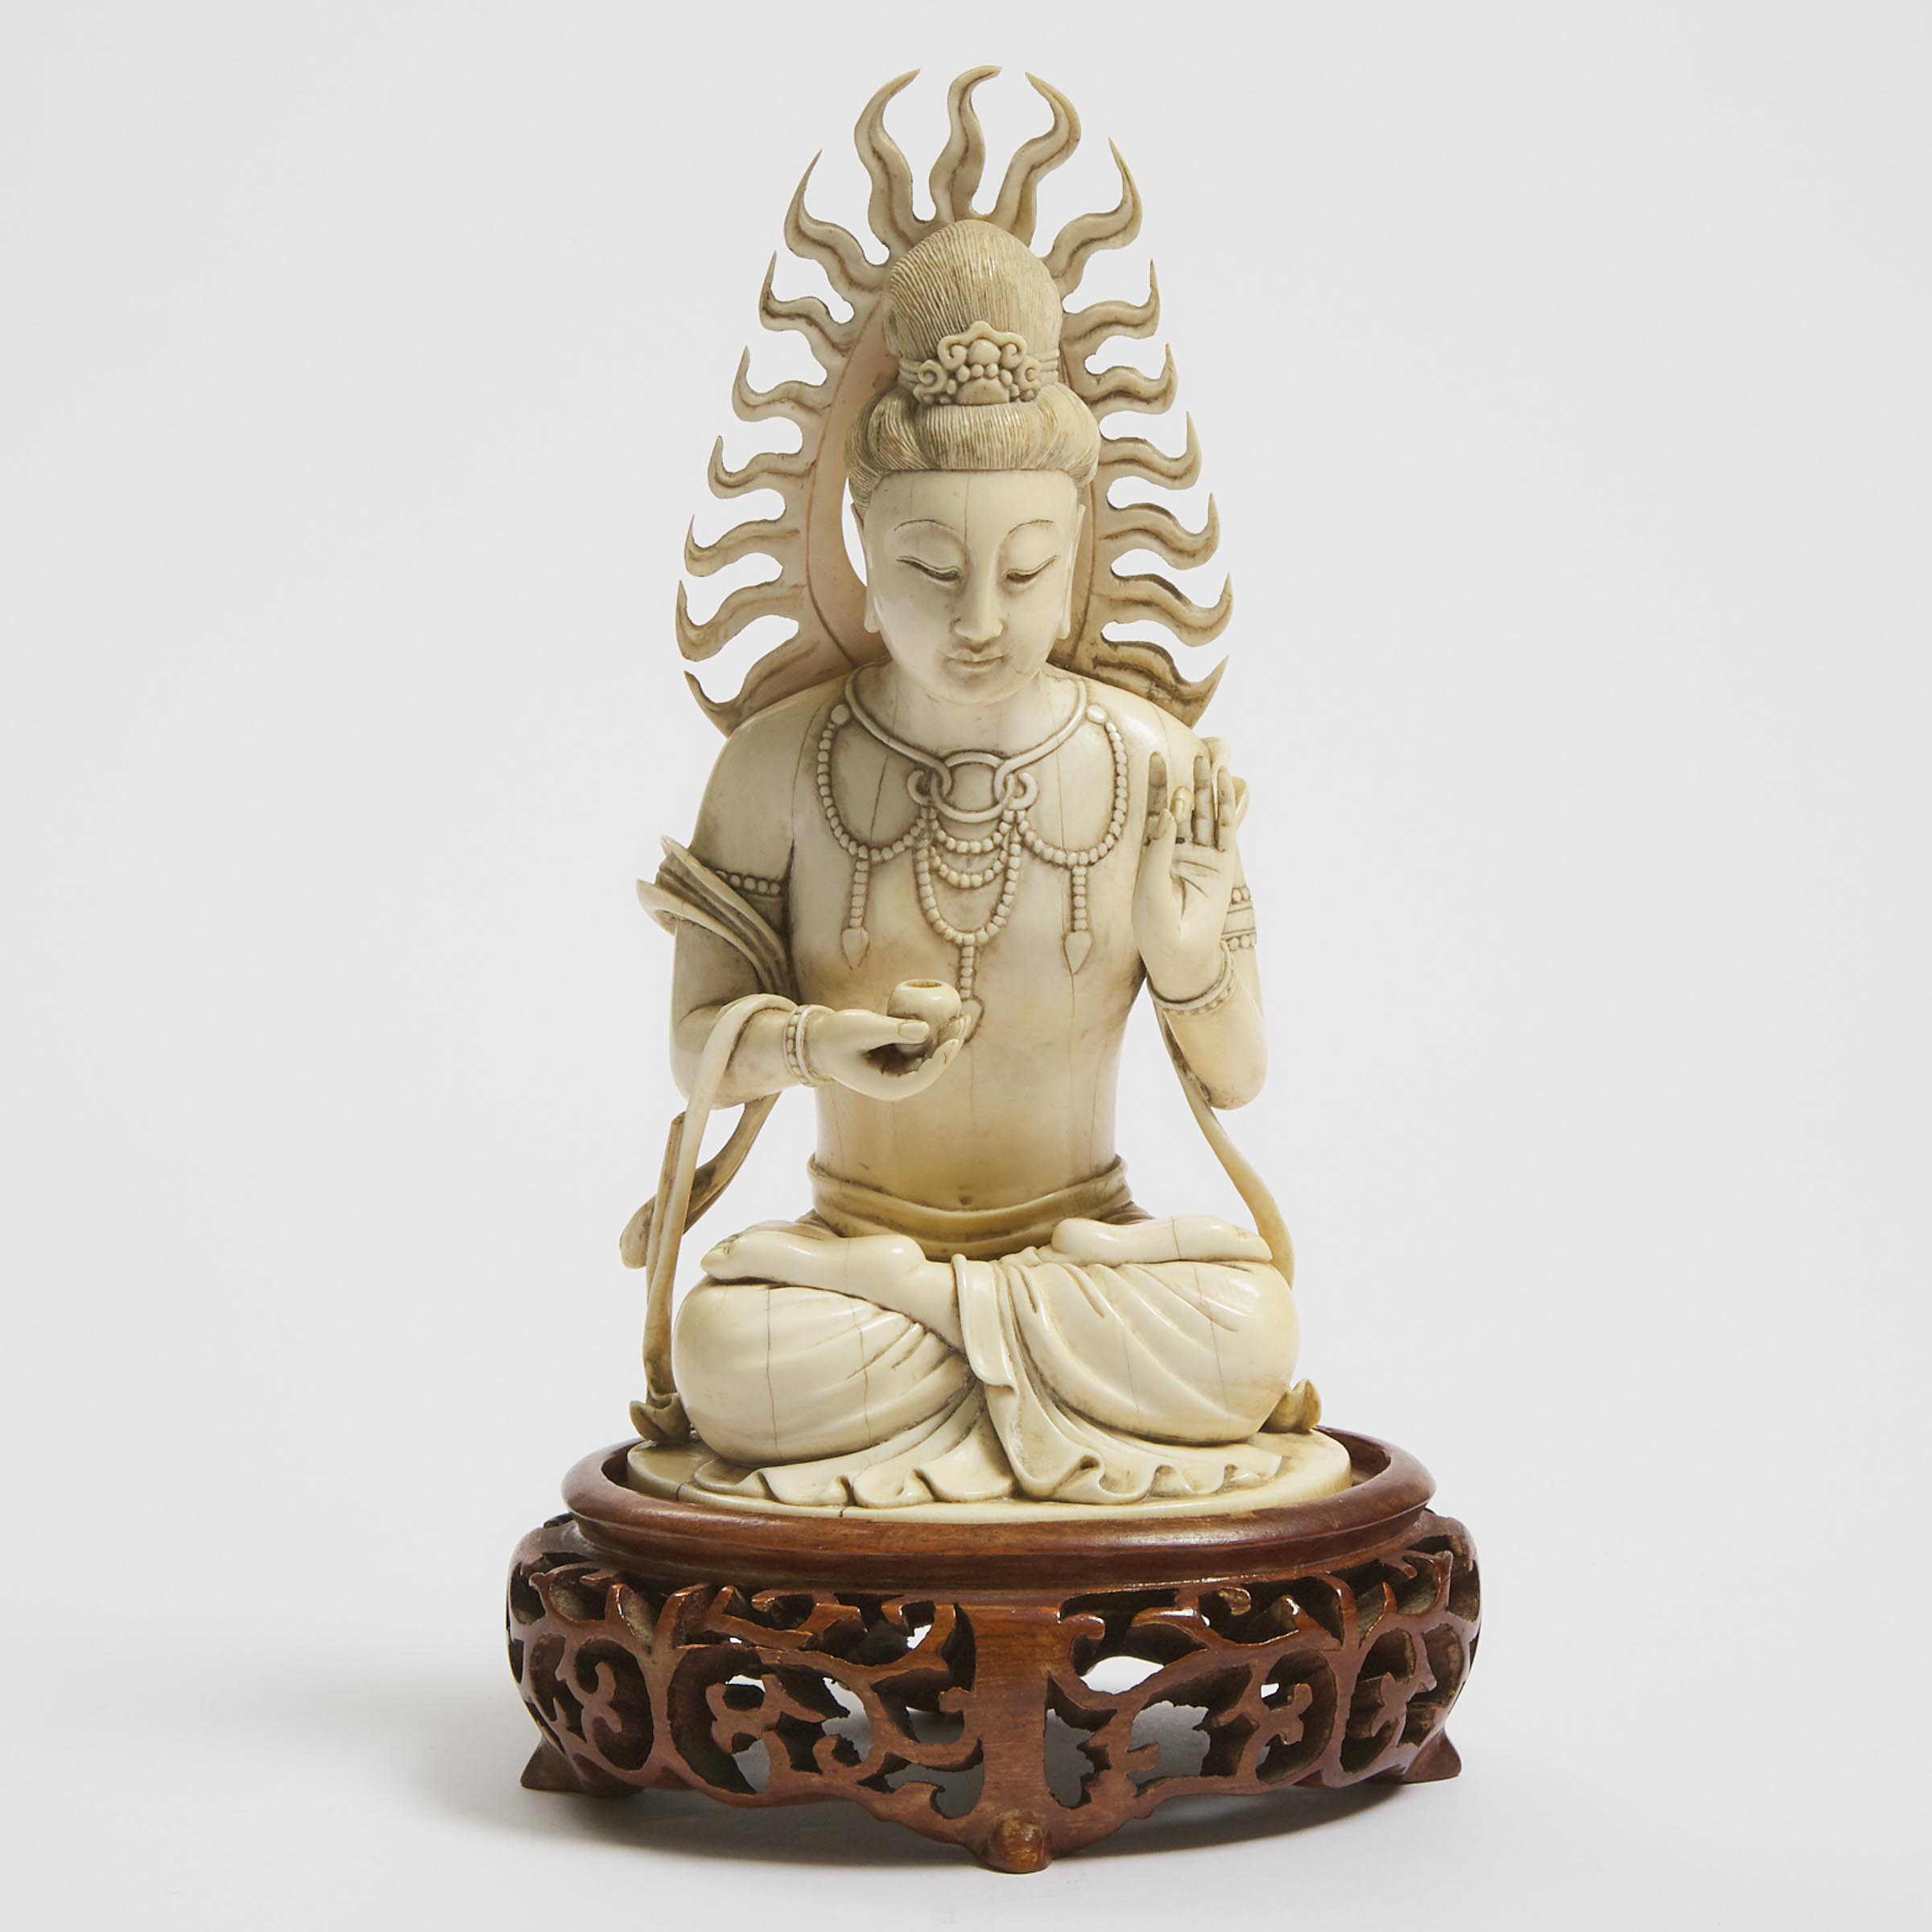 An Ivory Figure of a Seated Bodhisattva, Late 19th Century